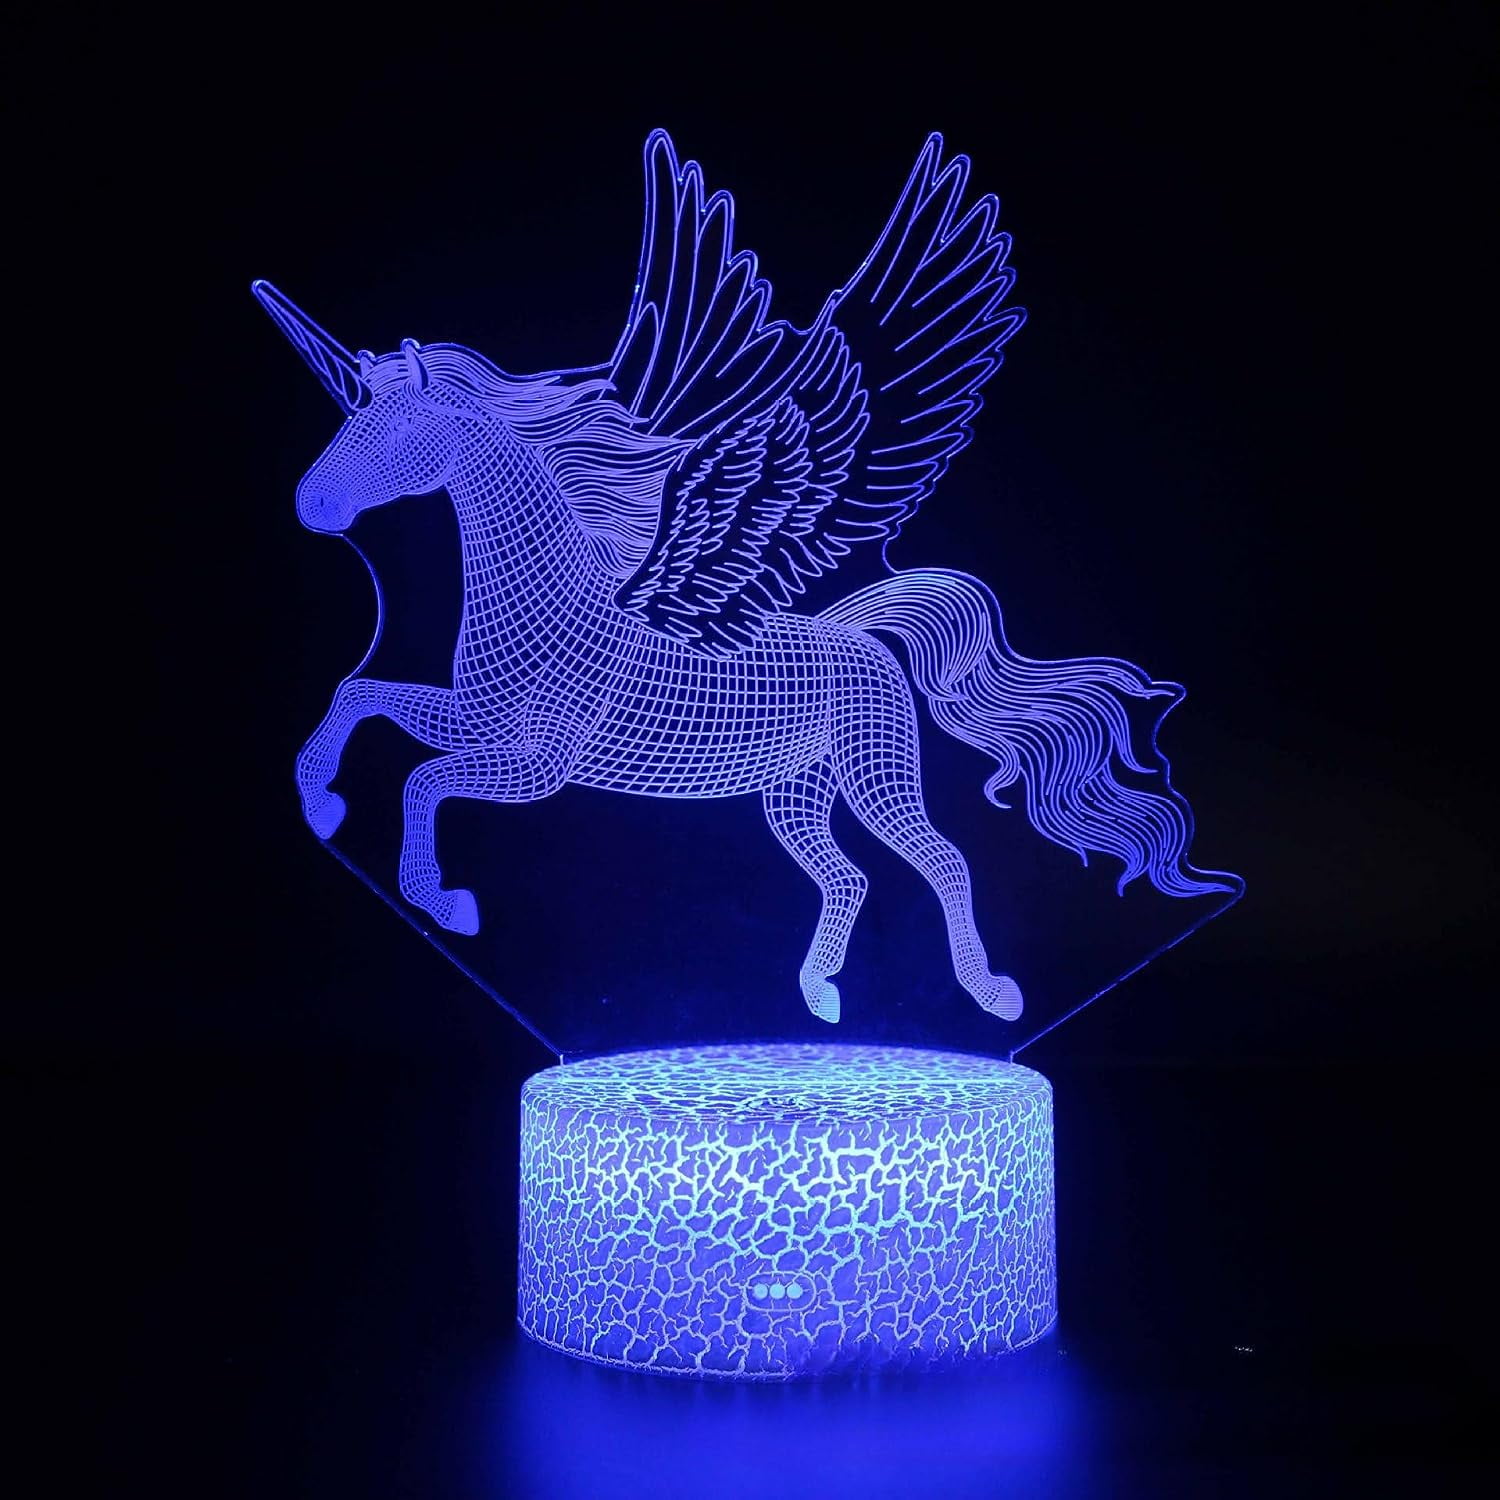 Xelparuc Unicorn Gifts for Grils,3D Illusion Night Light Bedside